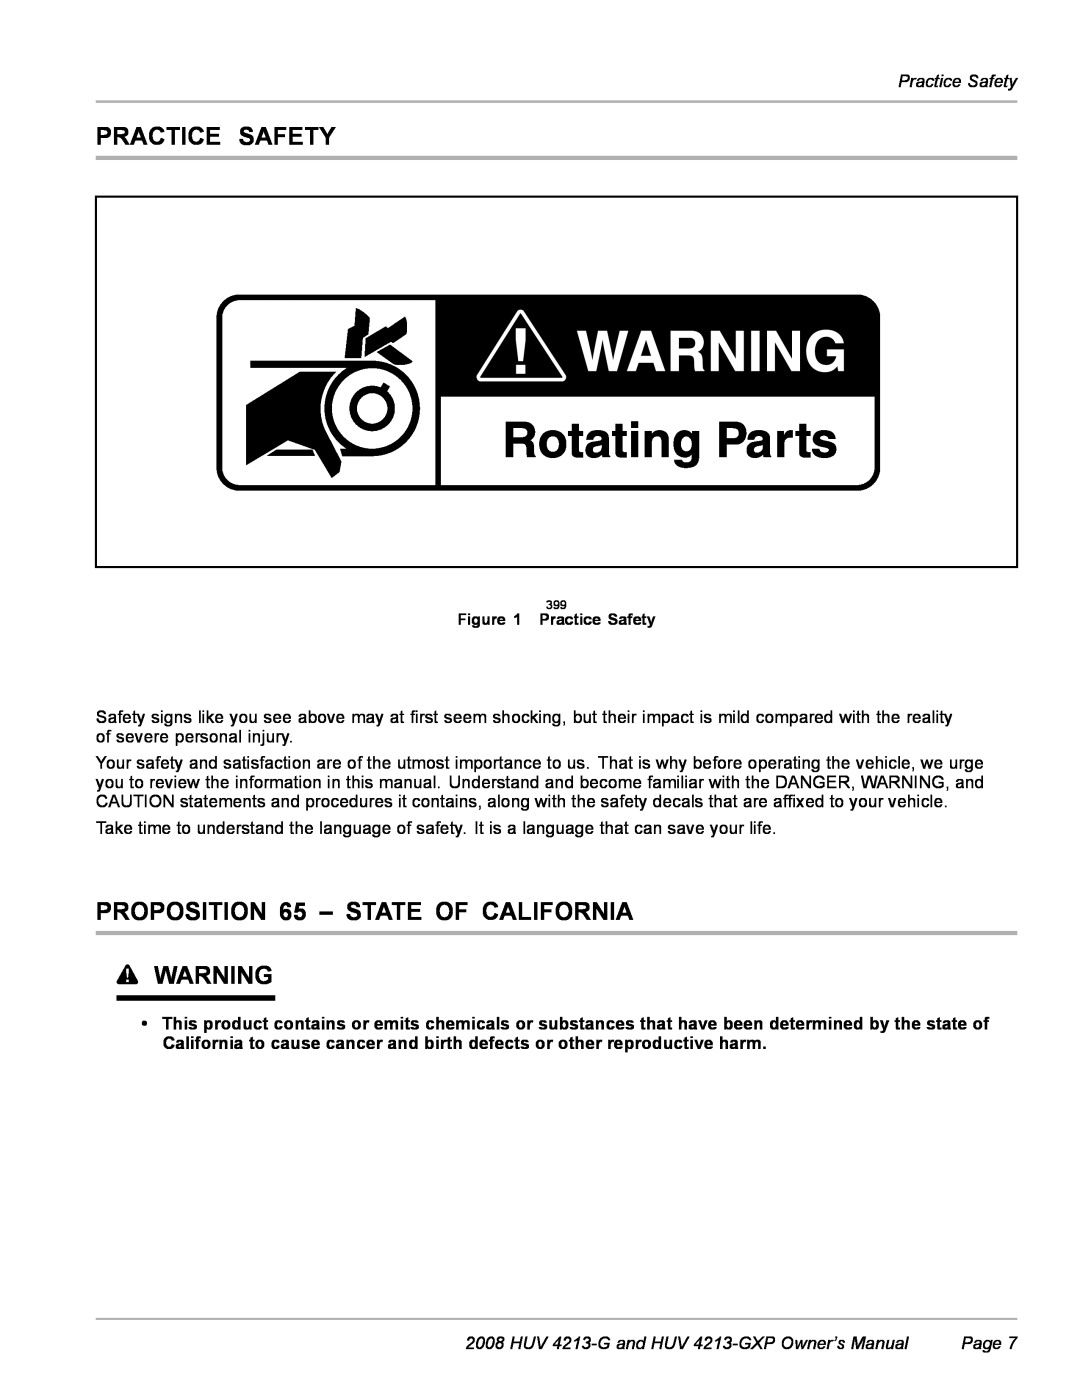 Husqvarna HUV 4213-GXP owner manual Practice Safety, PROPOSITION 65 - STATE OF CALIFORNIA, Page 